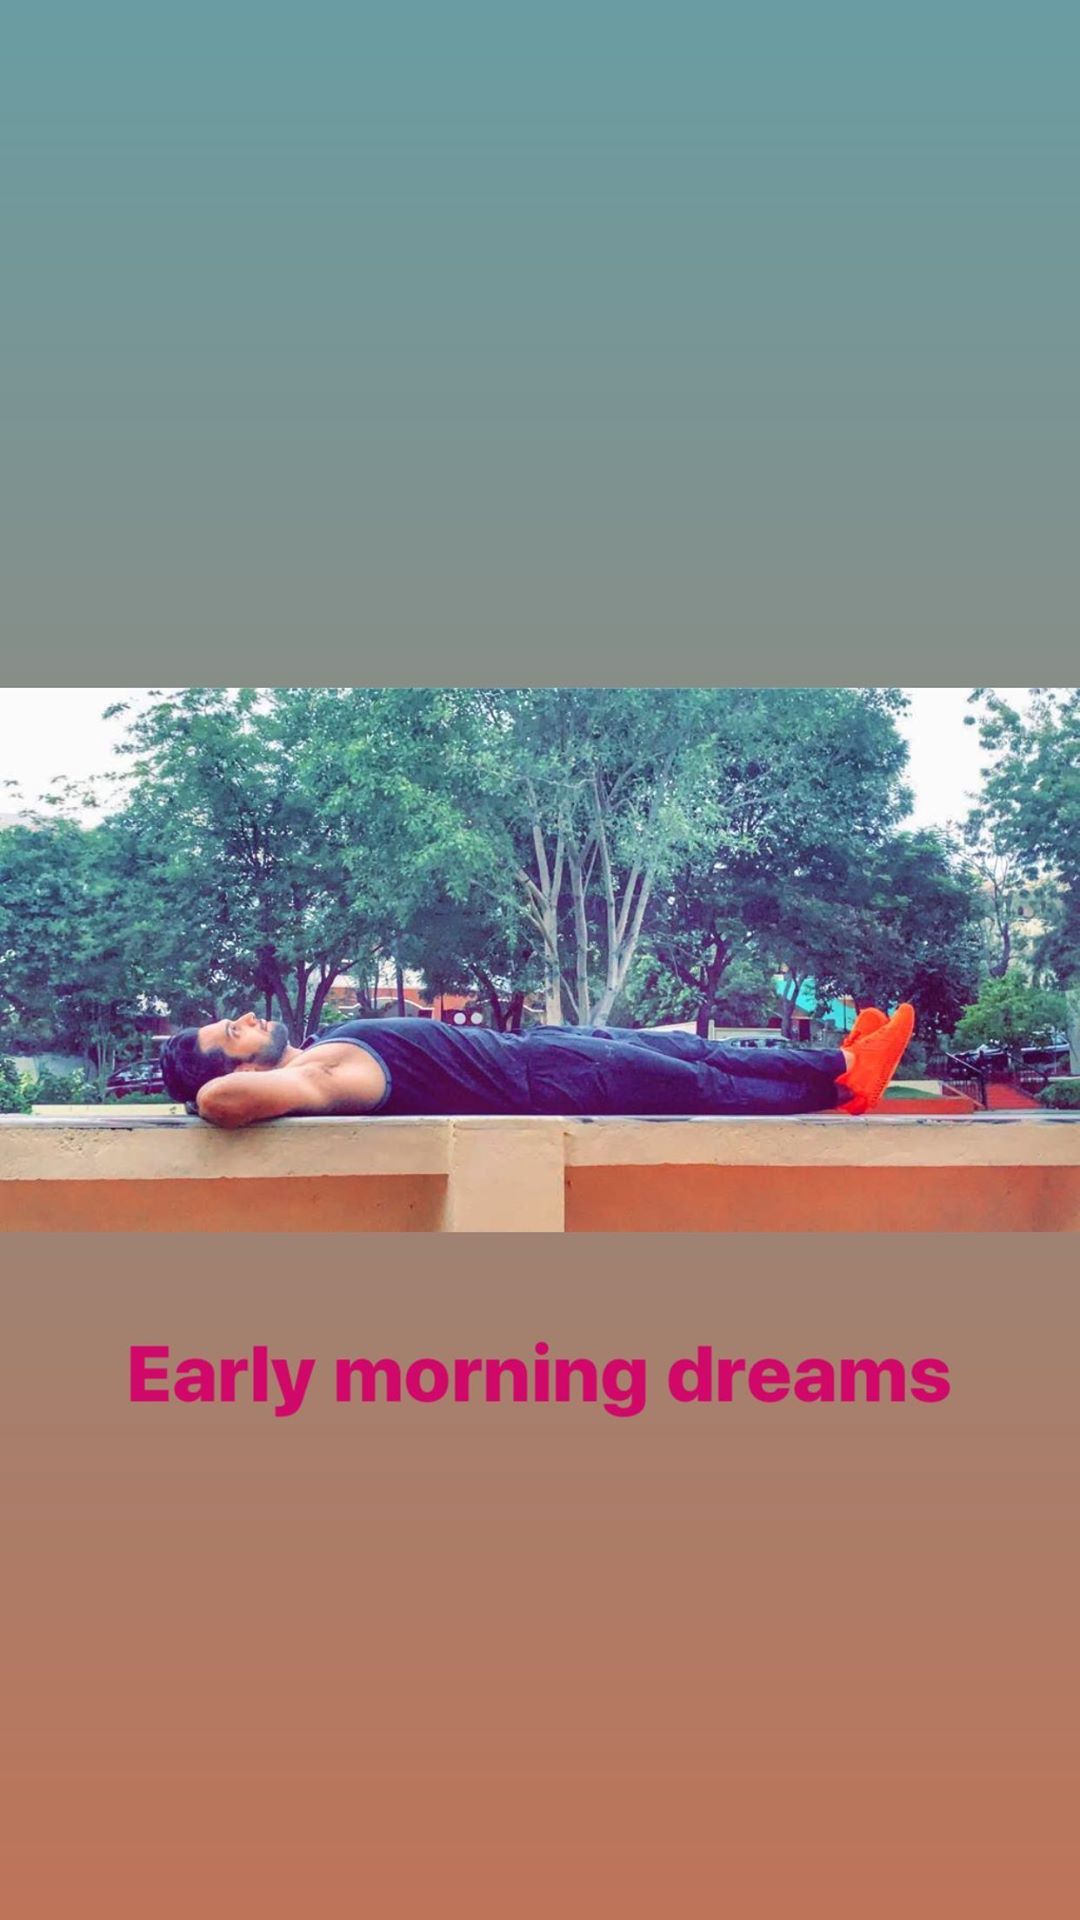 Kasautii Zindagii Kay actor Parth Samthaan shares latest picture, writes 'early morning dreams'